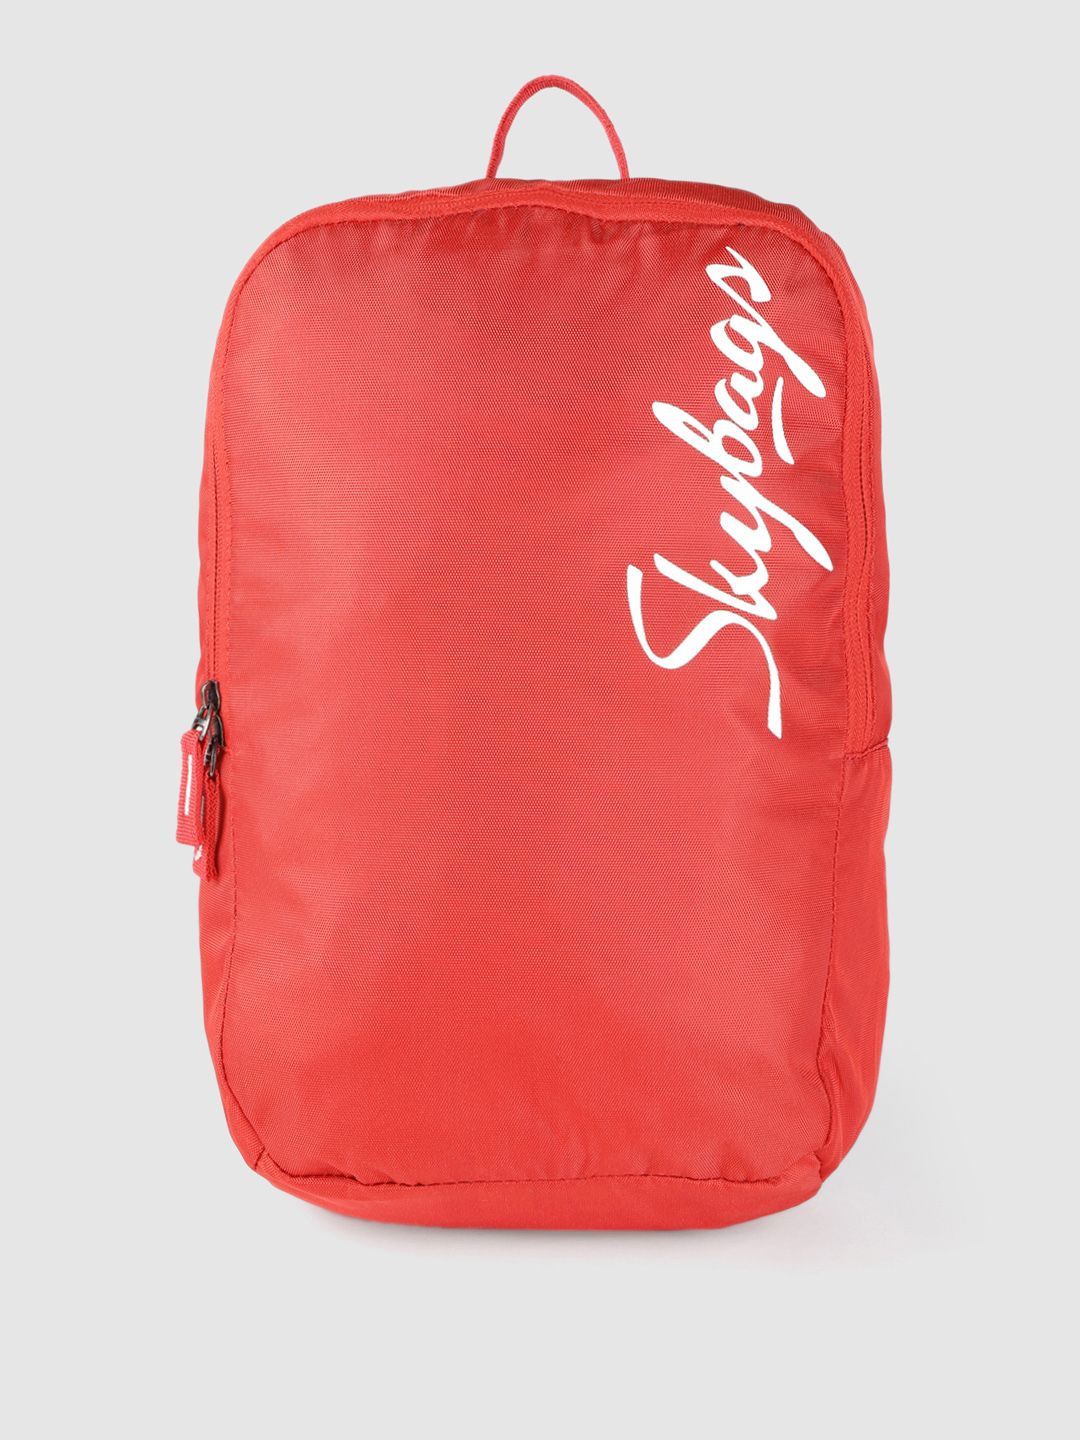 Skybags Unisex Red & White Brand Logo Printed Backpack Price in India